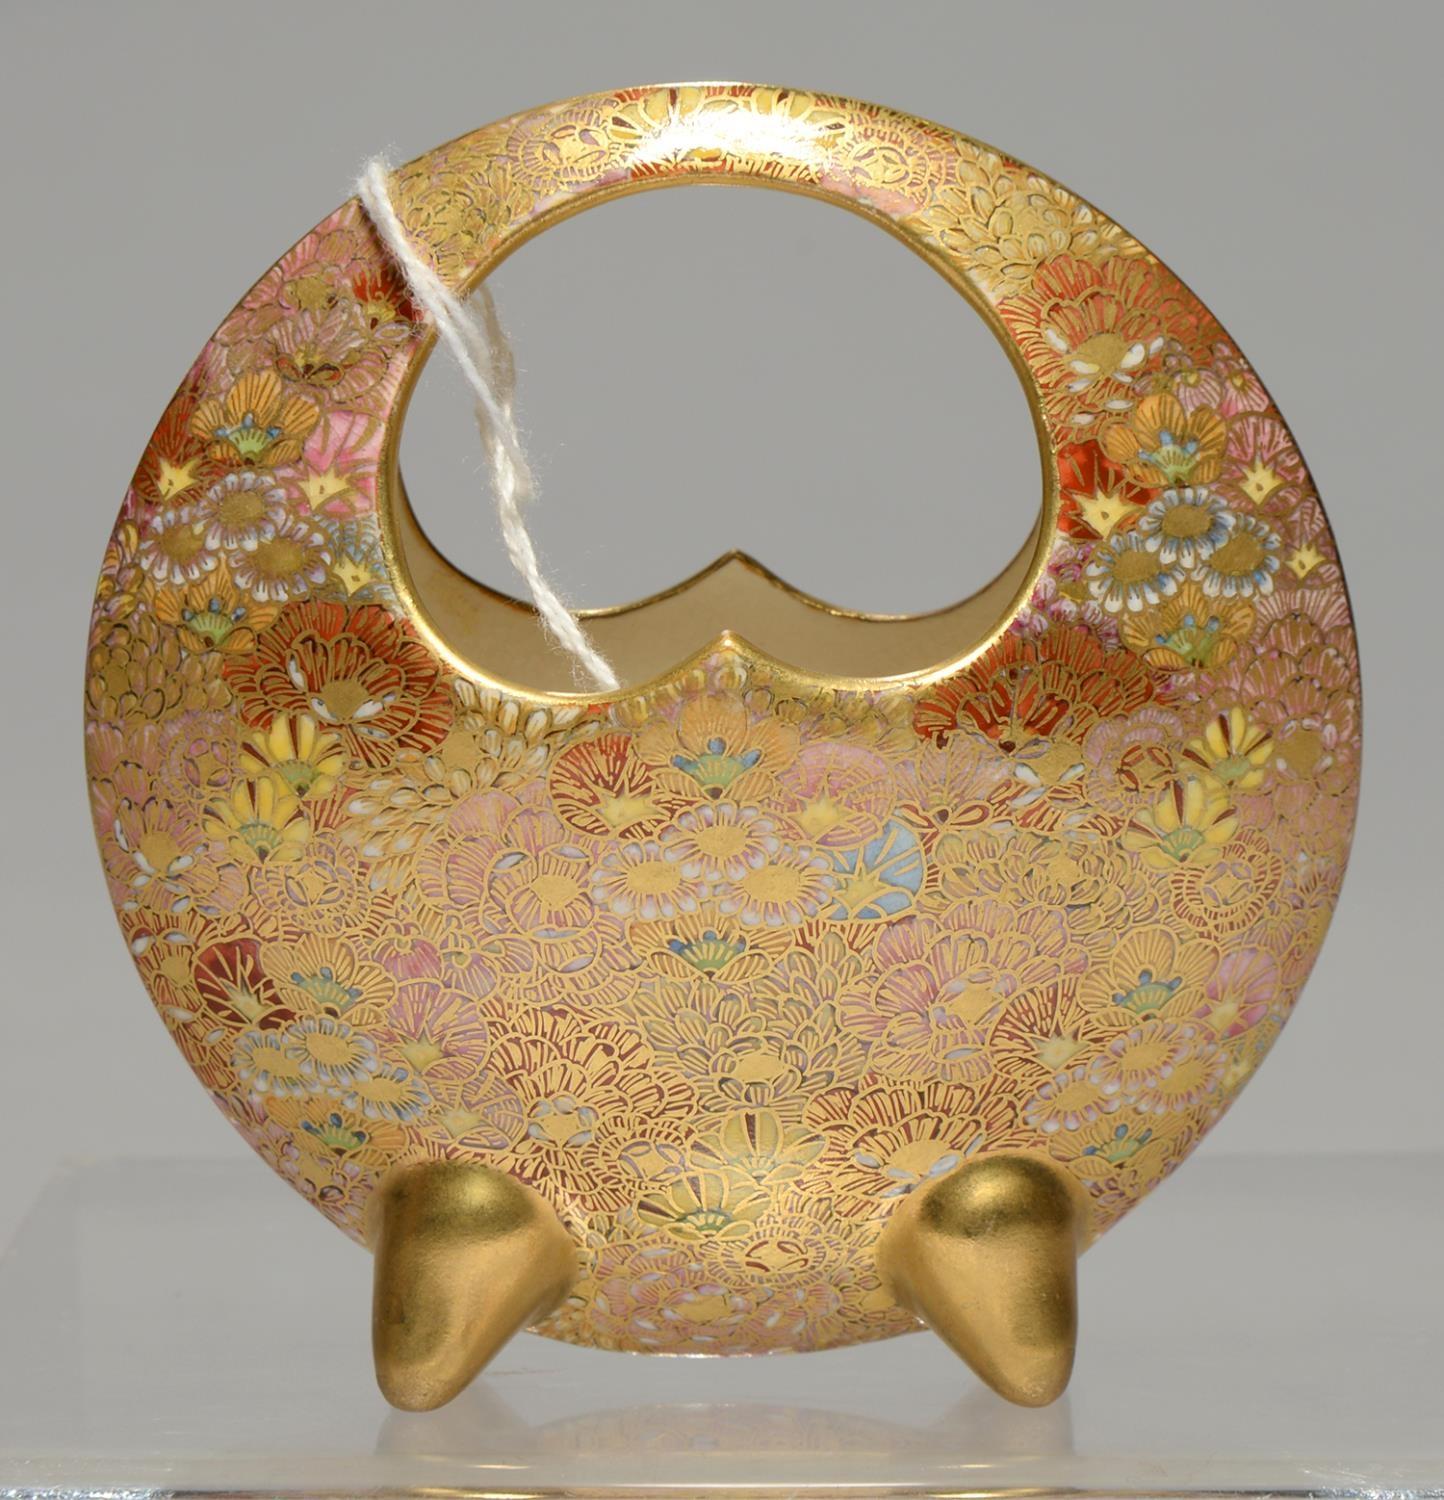 A JAPANESE SATSUMA MOON BASKET, MEIJI PERIOD, WITH MILLEFLEURS DECORATION, ON FOUR POINTED GILT - Image 2 of 2